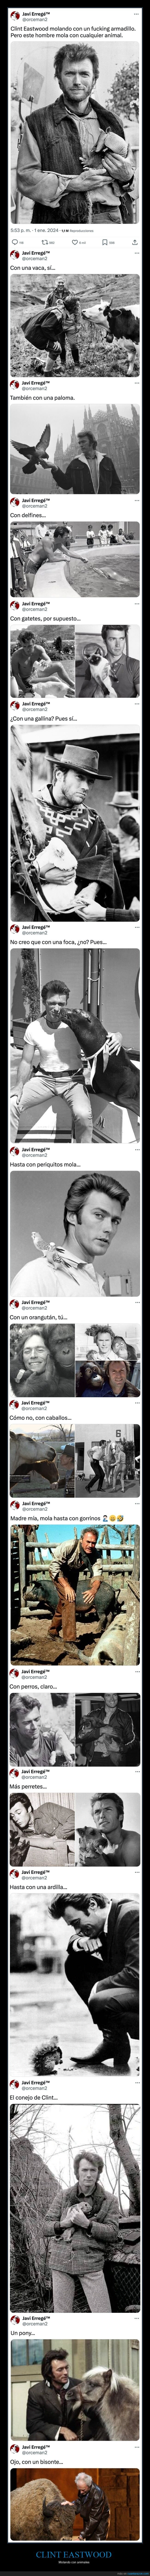 clint eastwood,animales